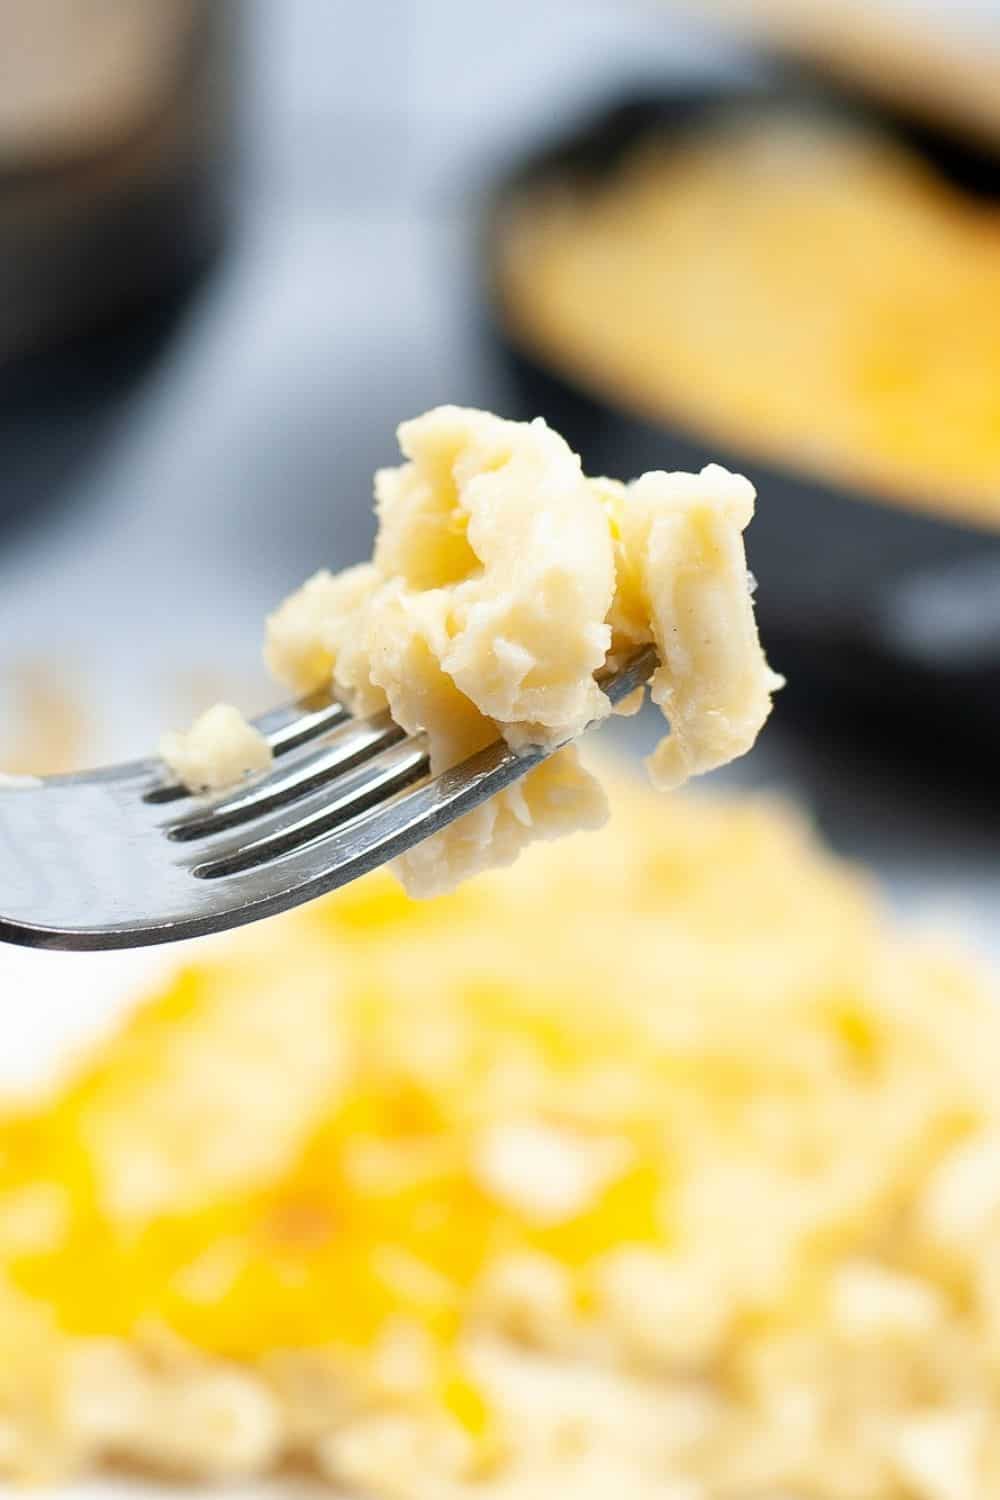 a fork lifting a bite of baked macaroni and cheese from the serving plate